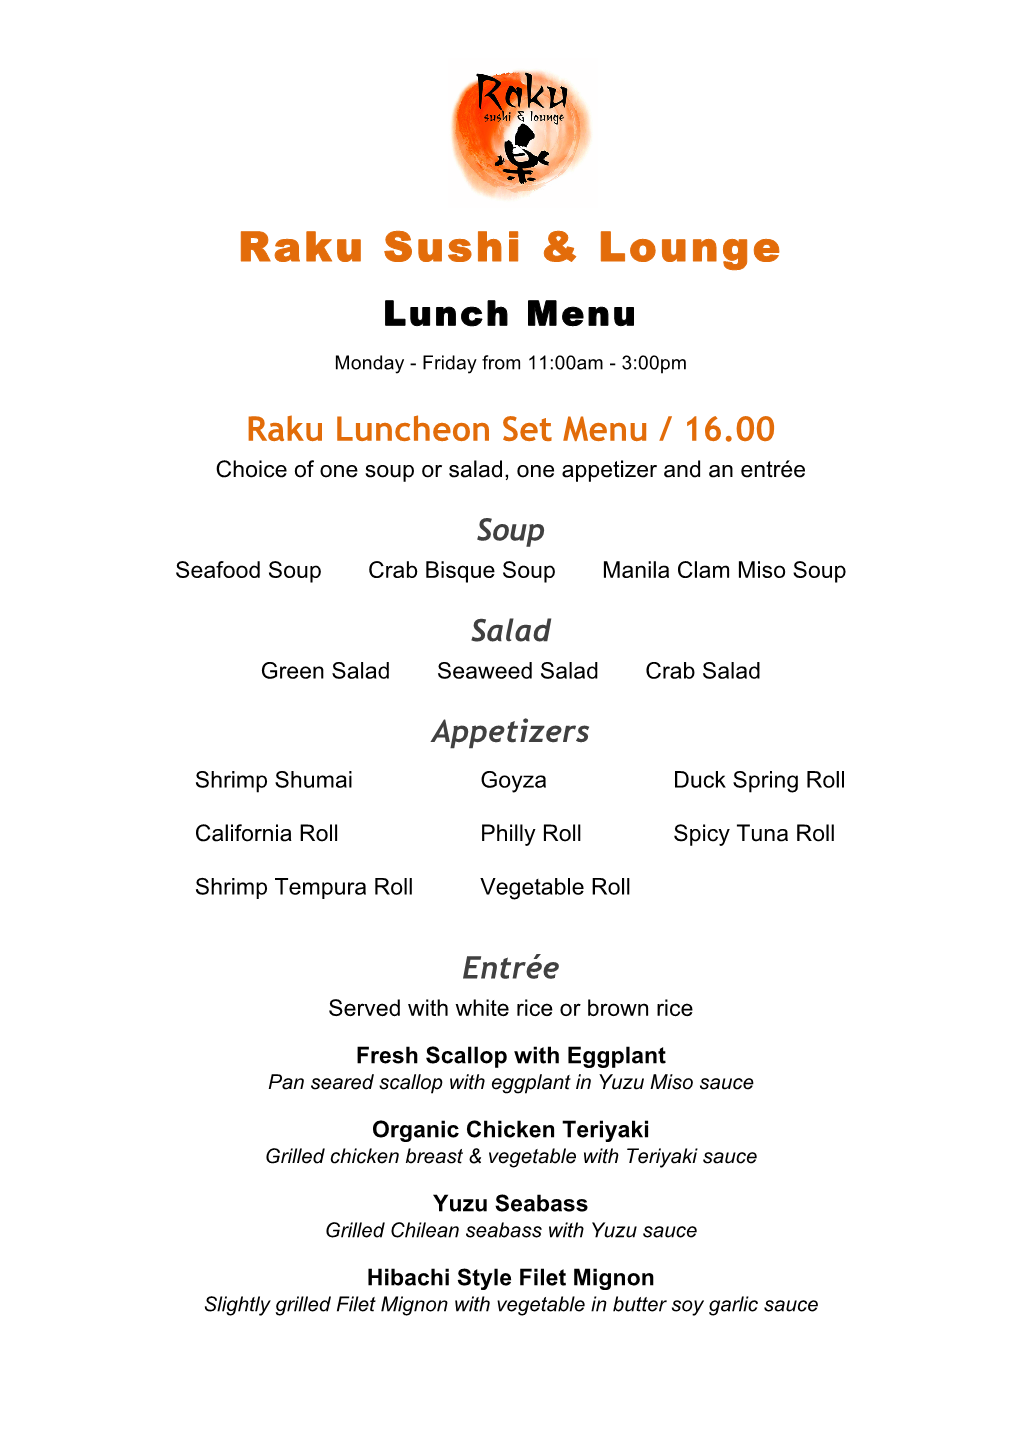 Lunch Menu Monday - Friday from 11:00Am - 3:00Pm